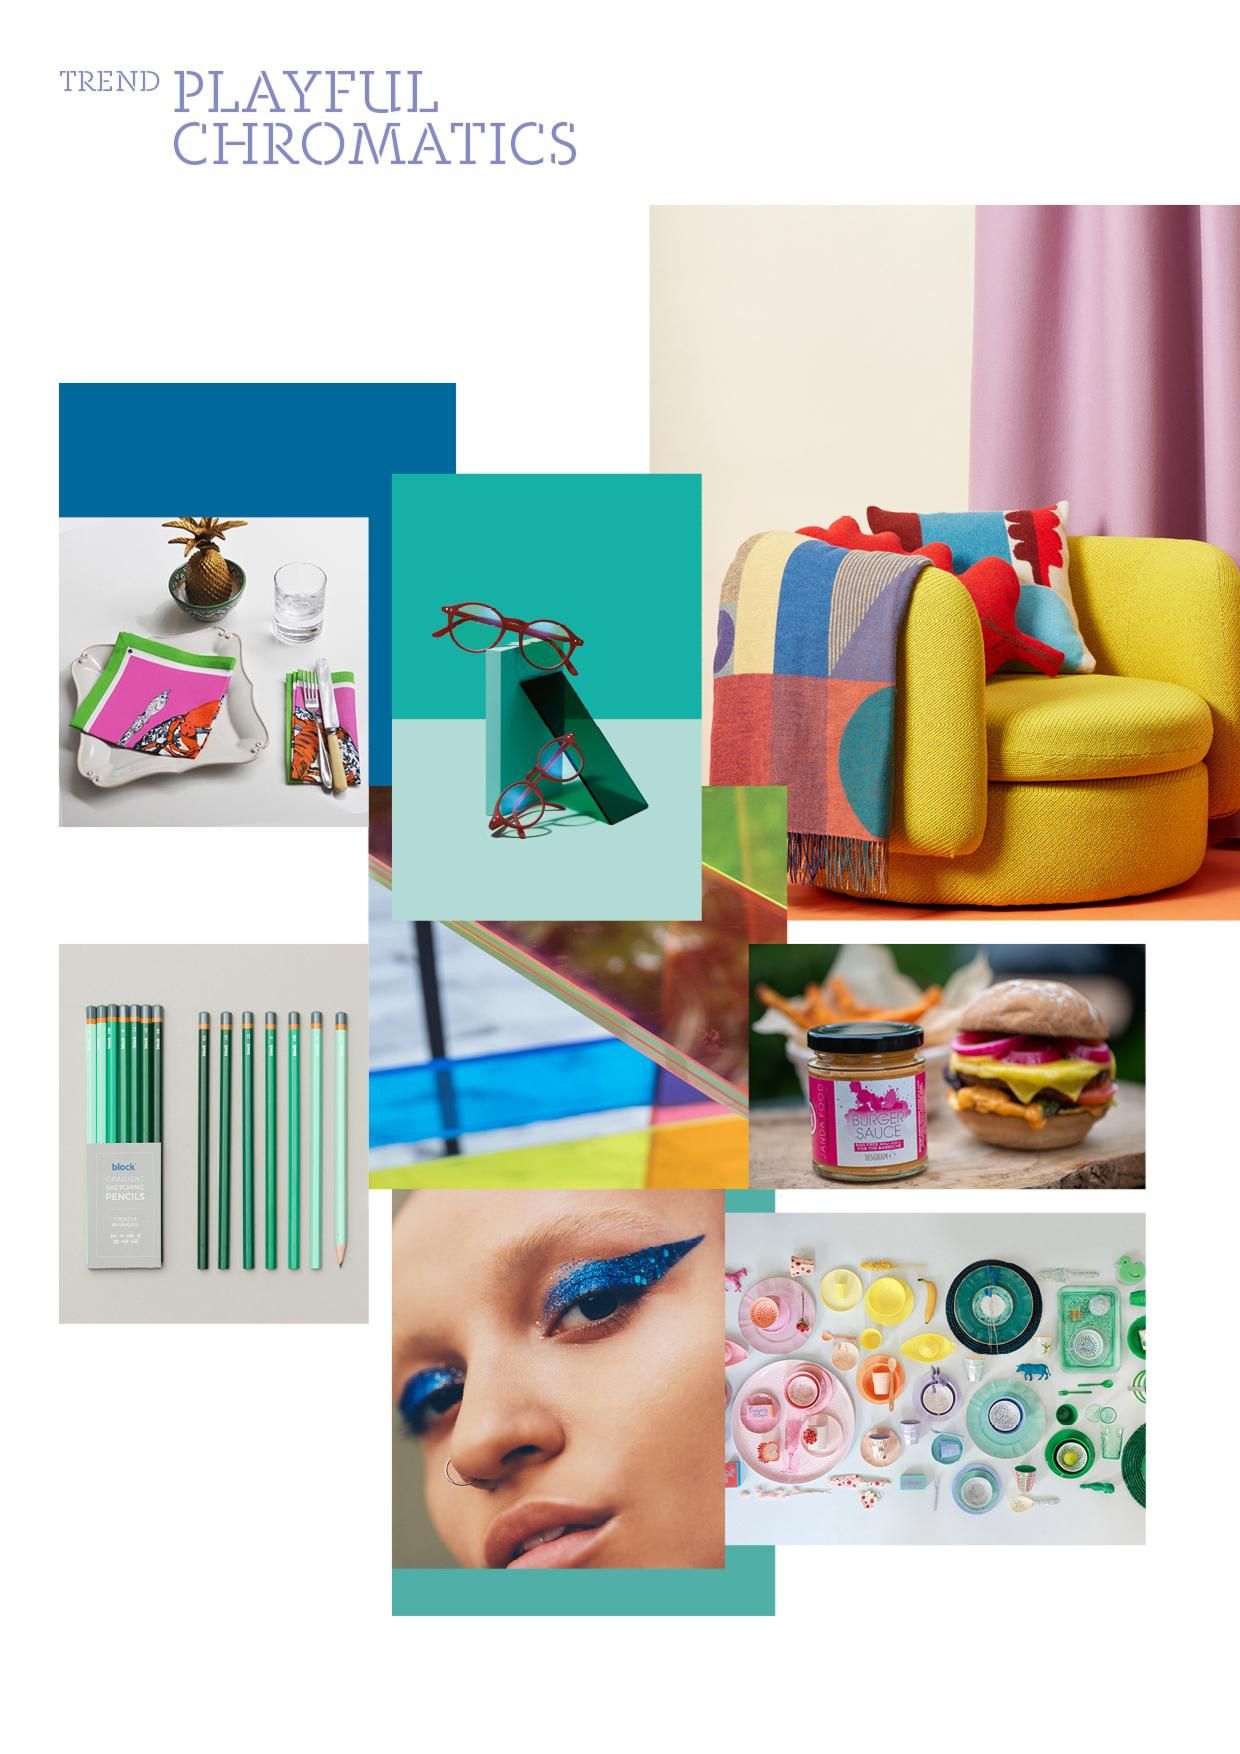 Top Drawer Trends S/S20 Playful Chromatics